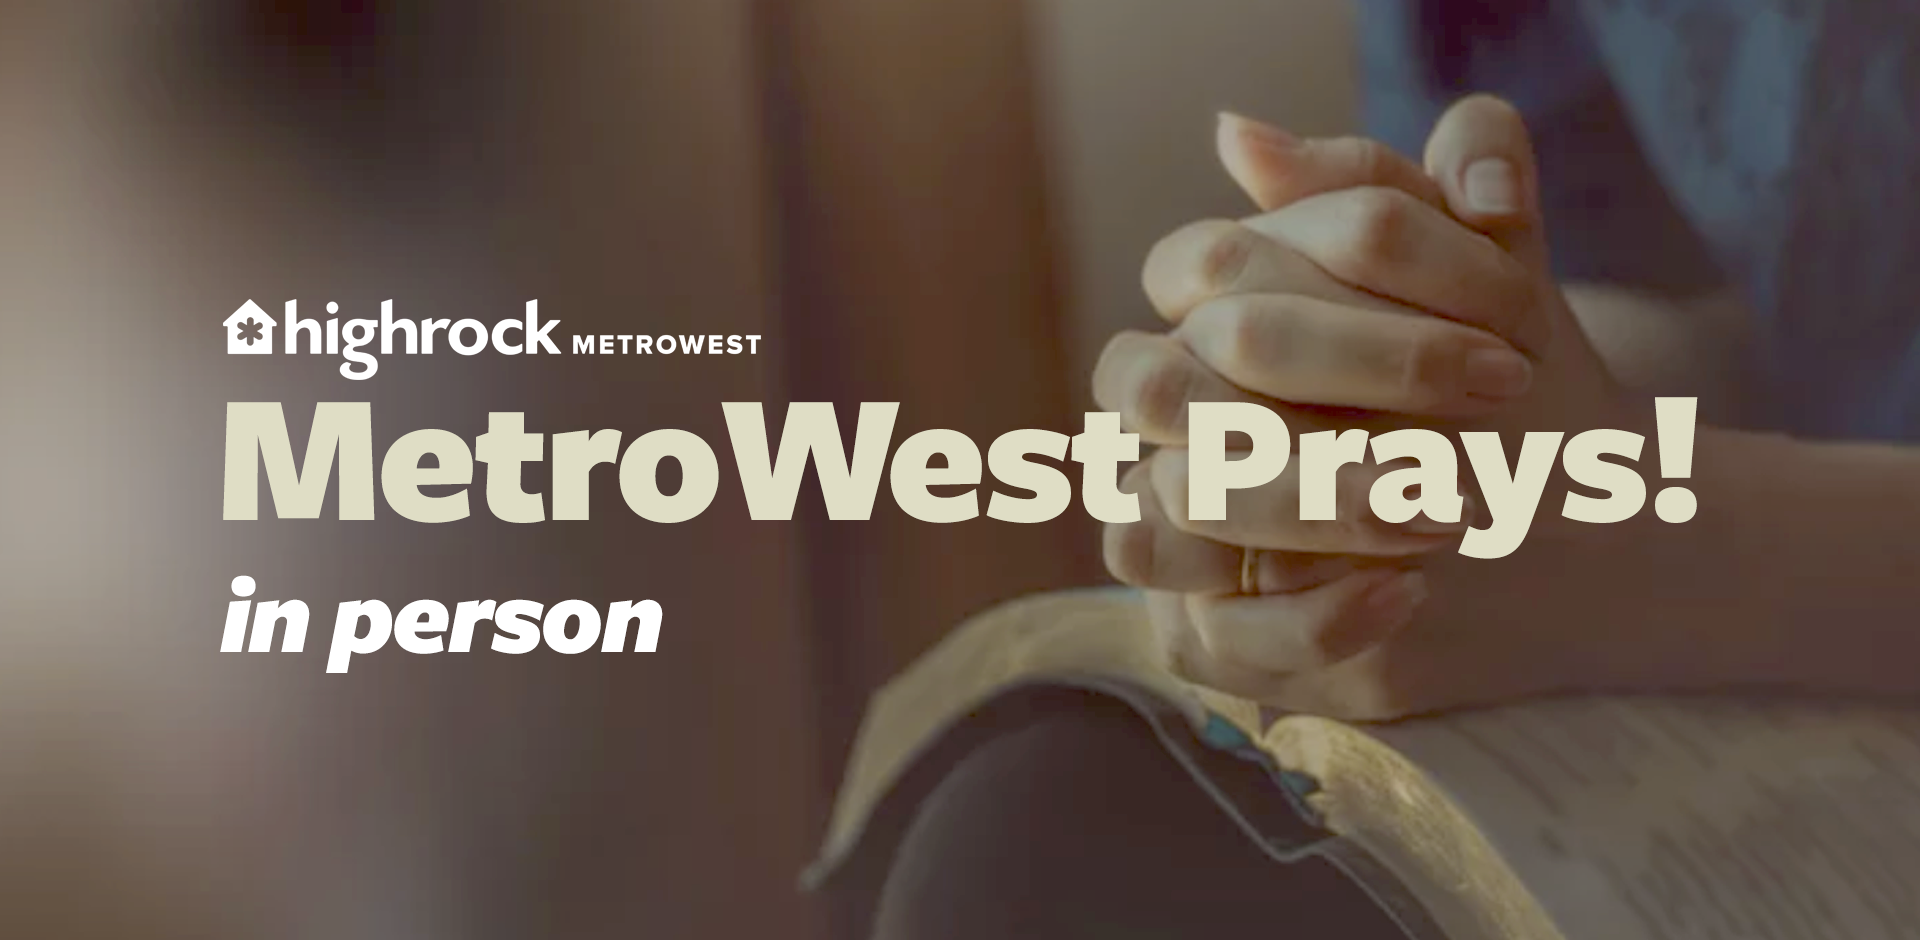 MetroWest Prays IN PERSON 1920 x 940